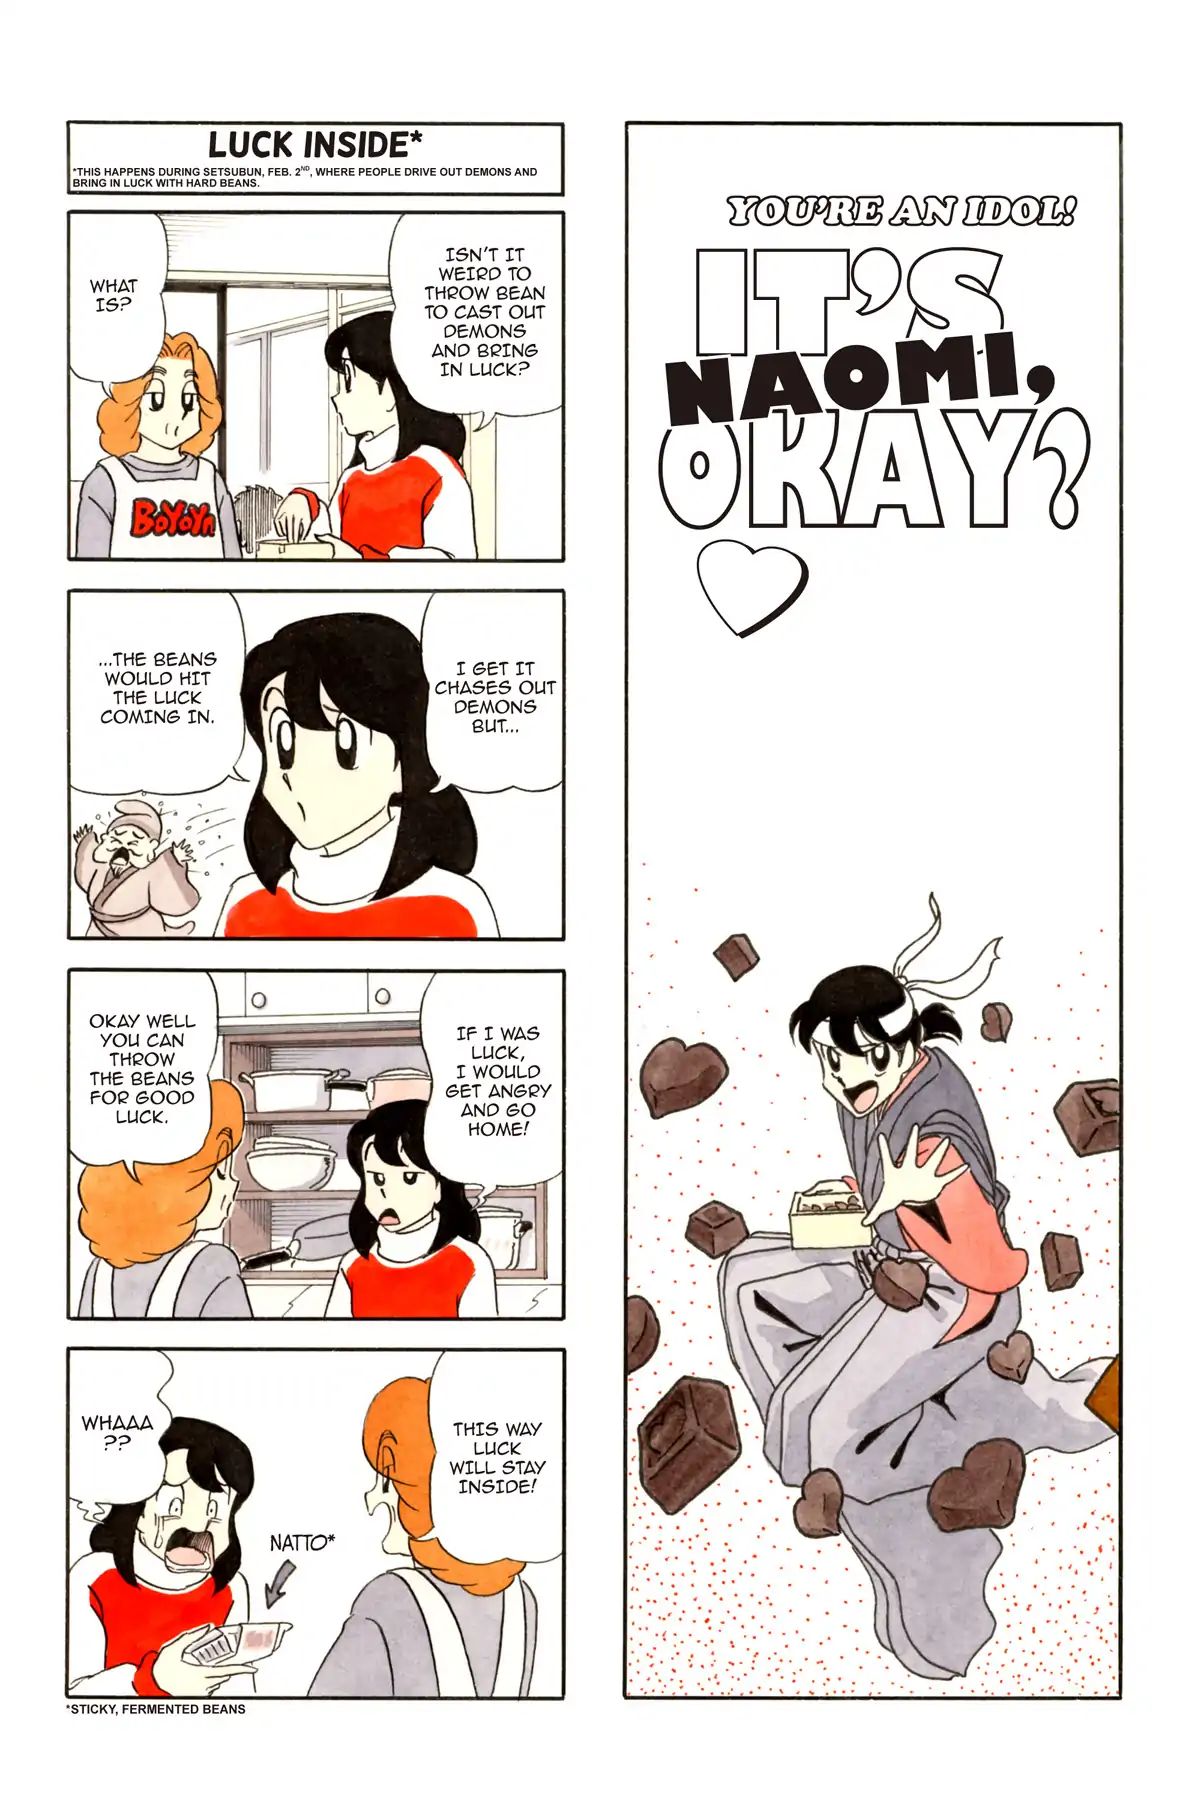 It's Naomi, Okay? After 16 Chapter 26 #1